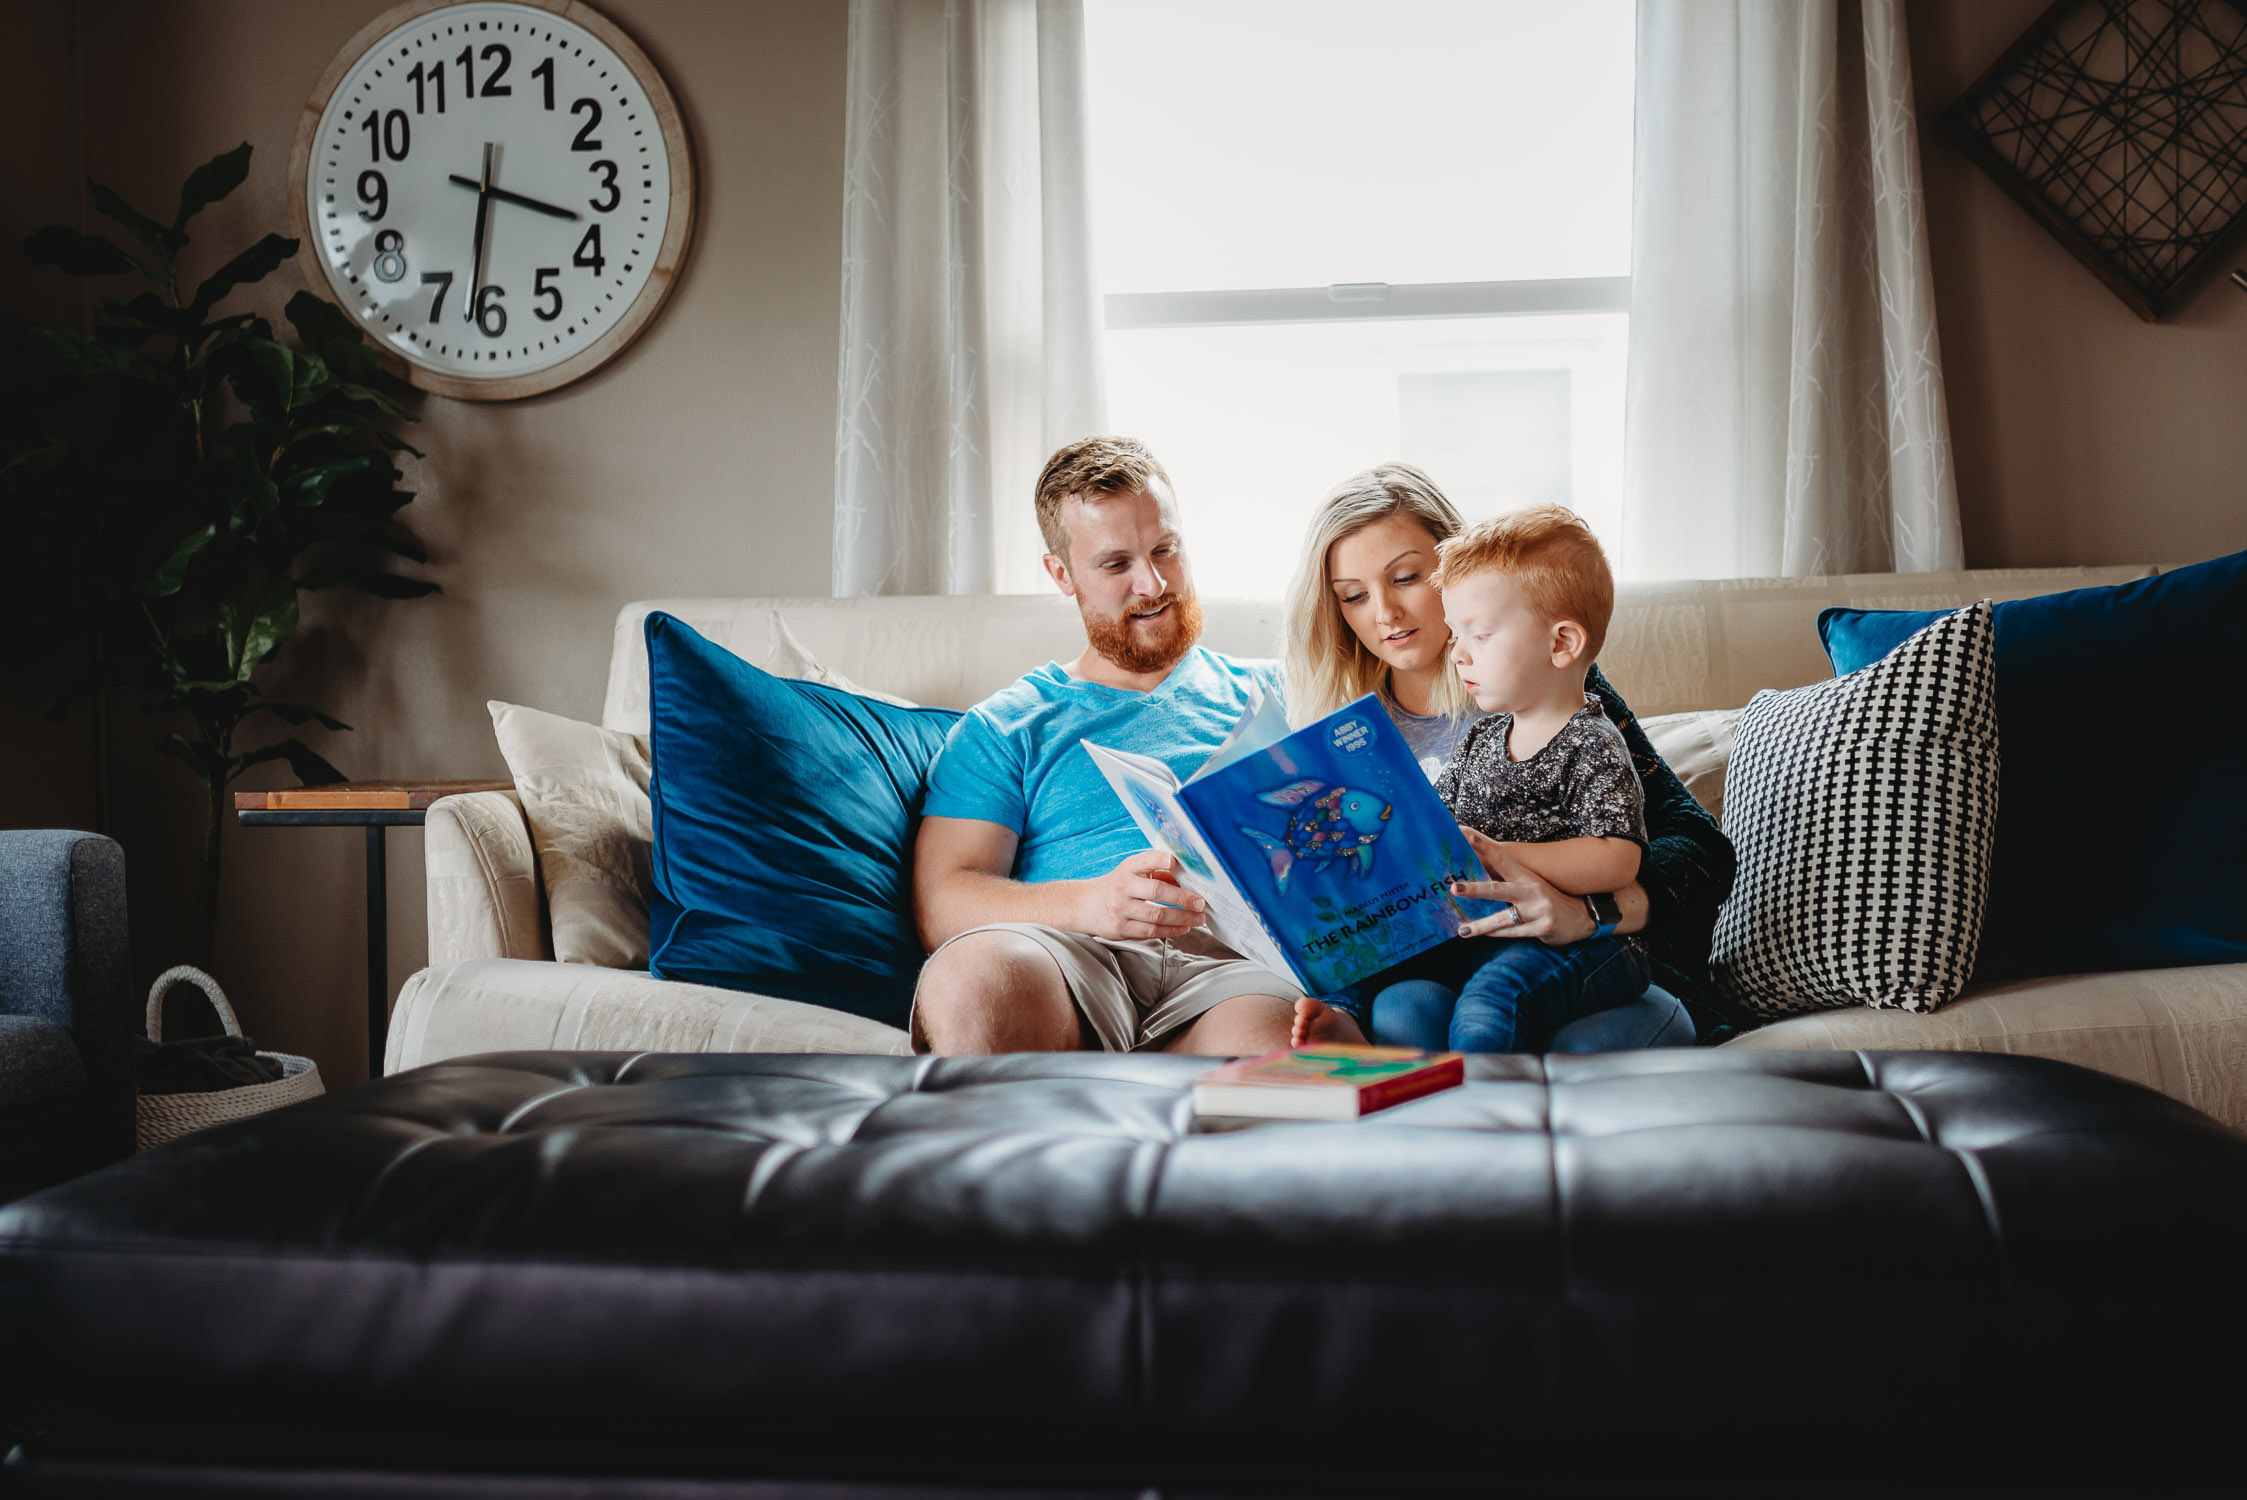 lifestyle photography session of family reading together on couch